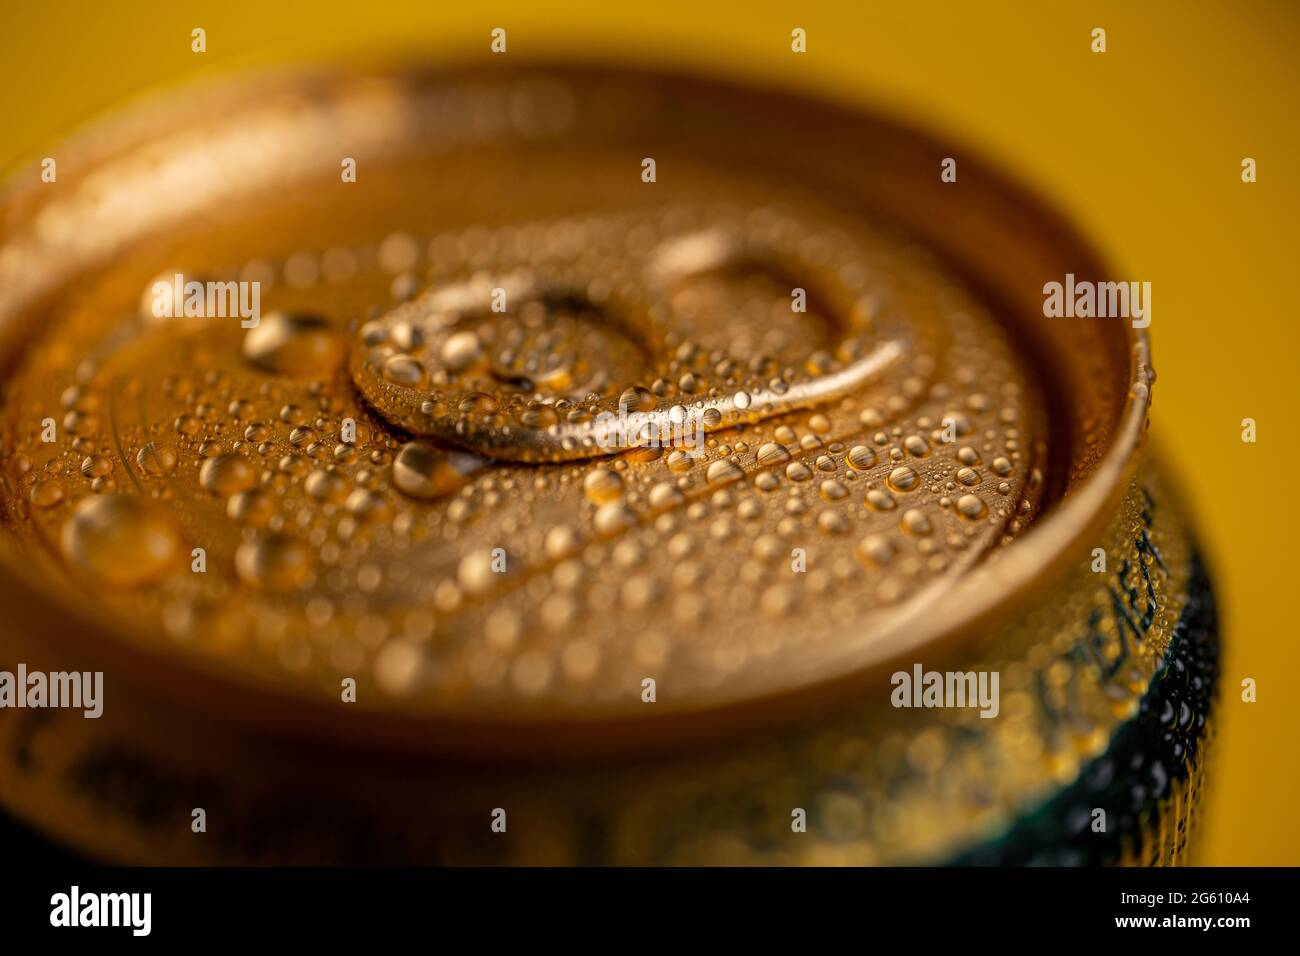 cold metal soda can with condensation drops Stock Photo